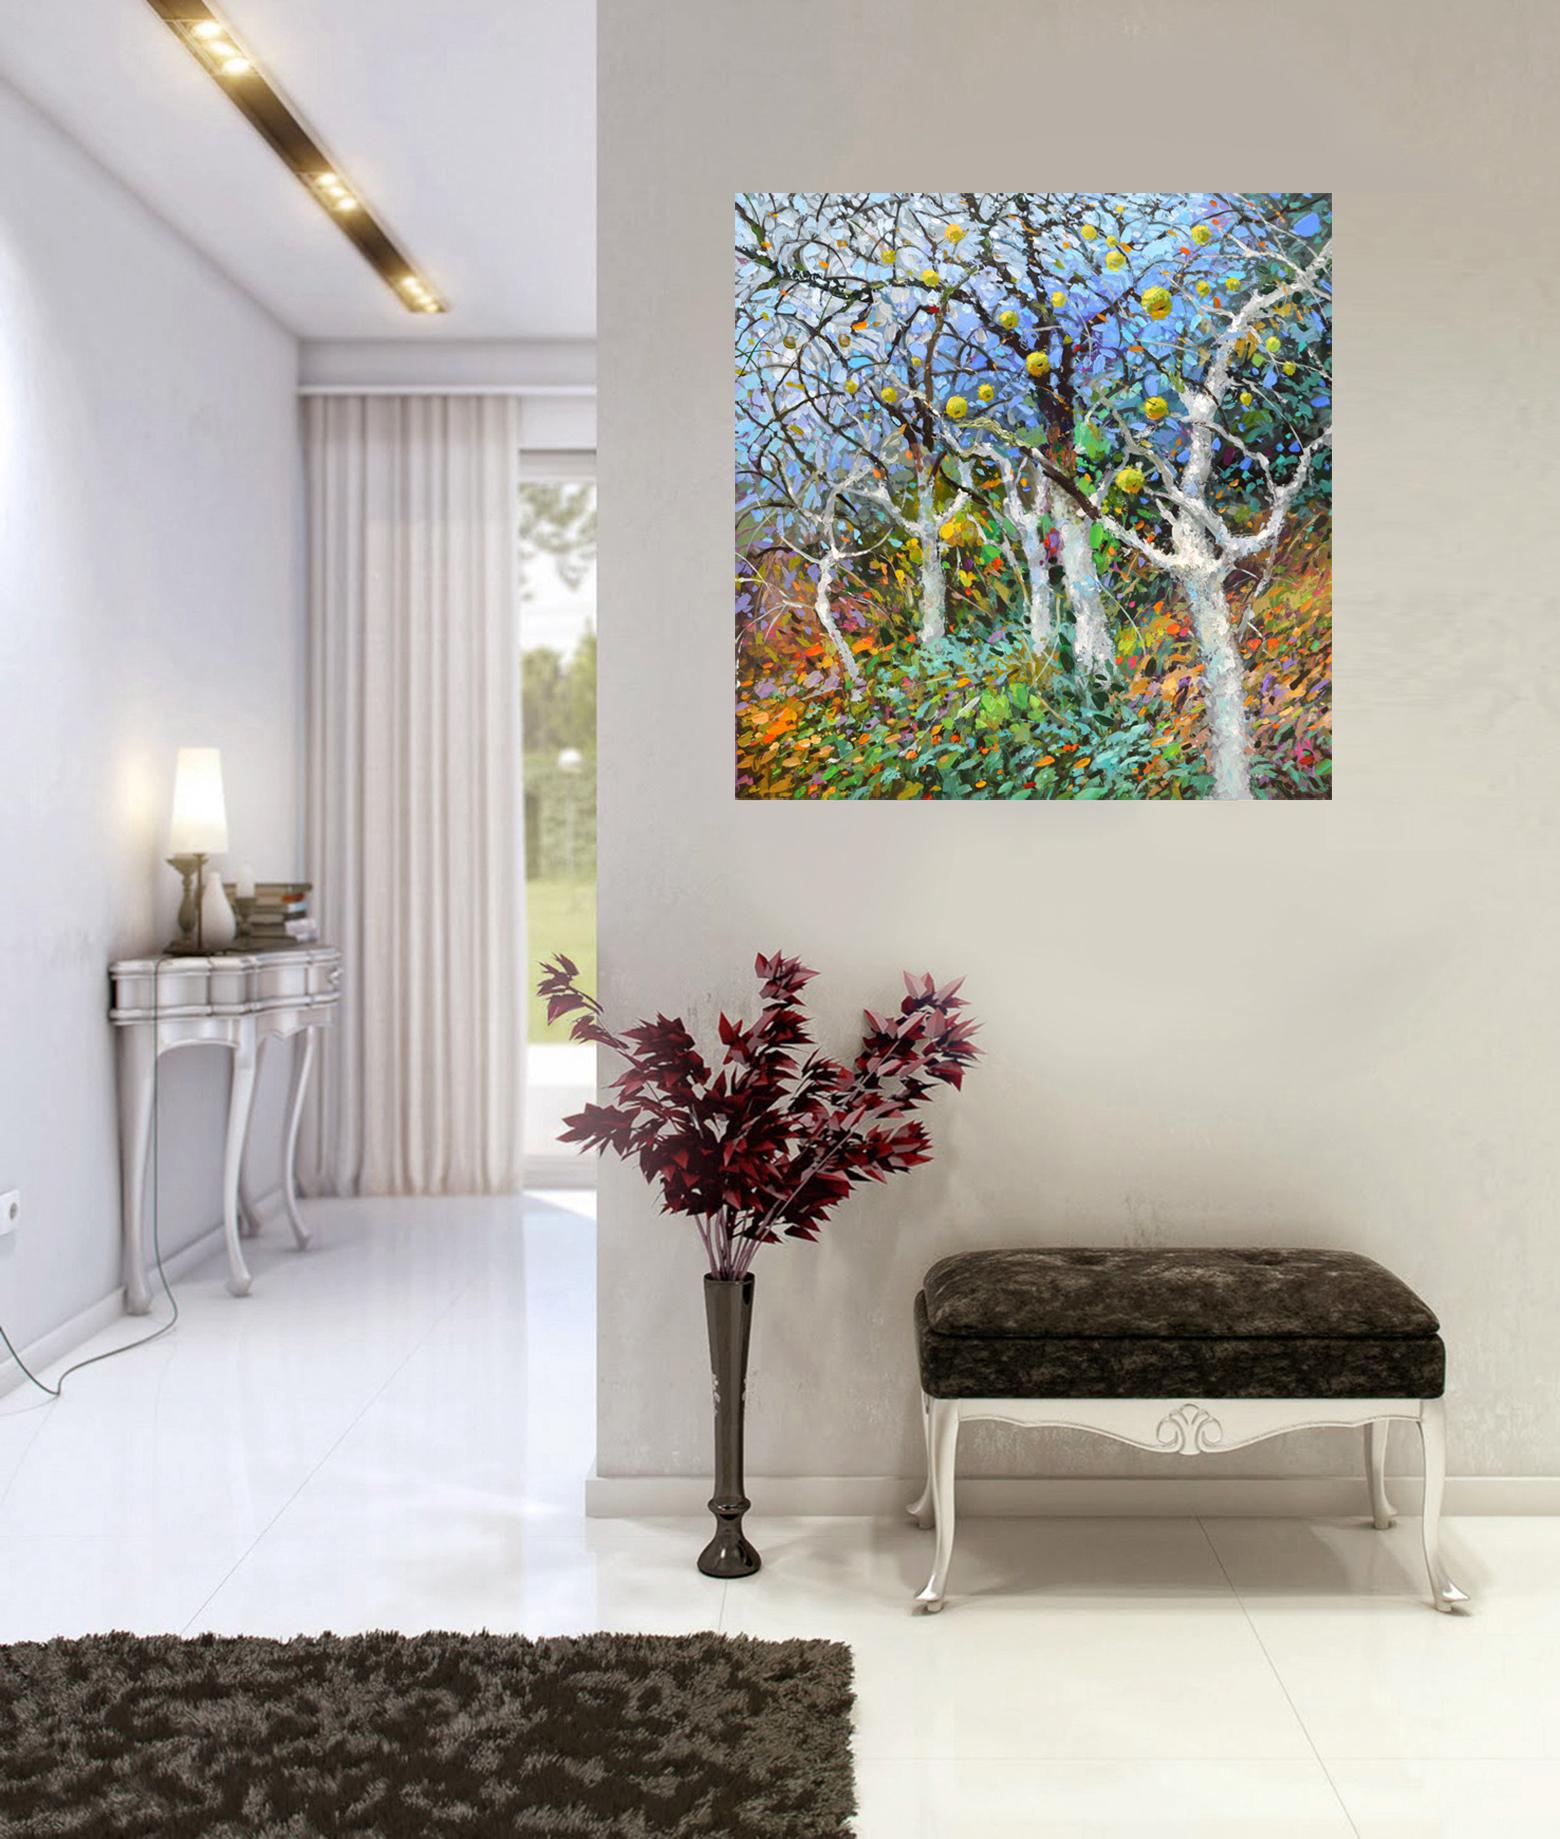 Autumn apple trees - oil, acrylic painting on canvas, ready to hang

size: 27,5